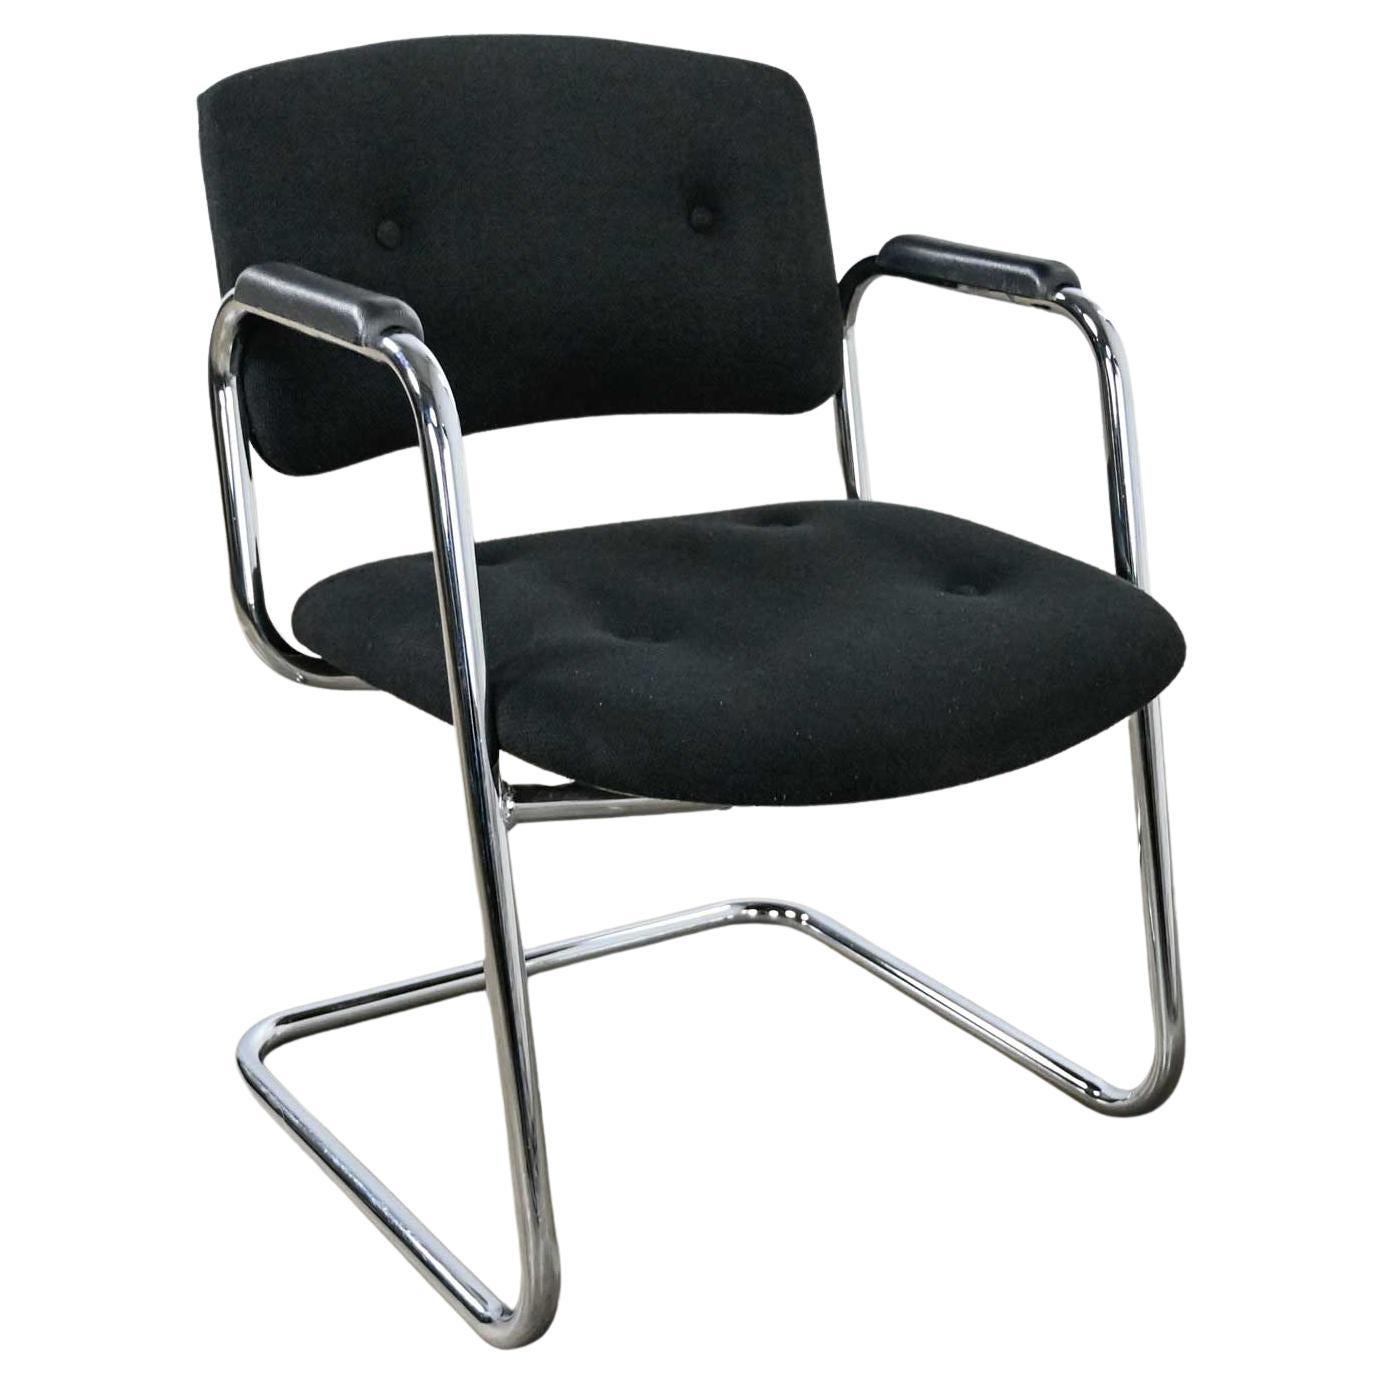 Vintage Modern Black & Chrome Cantilever Chair by United Chair Co Style of Steel